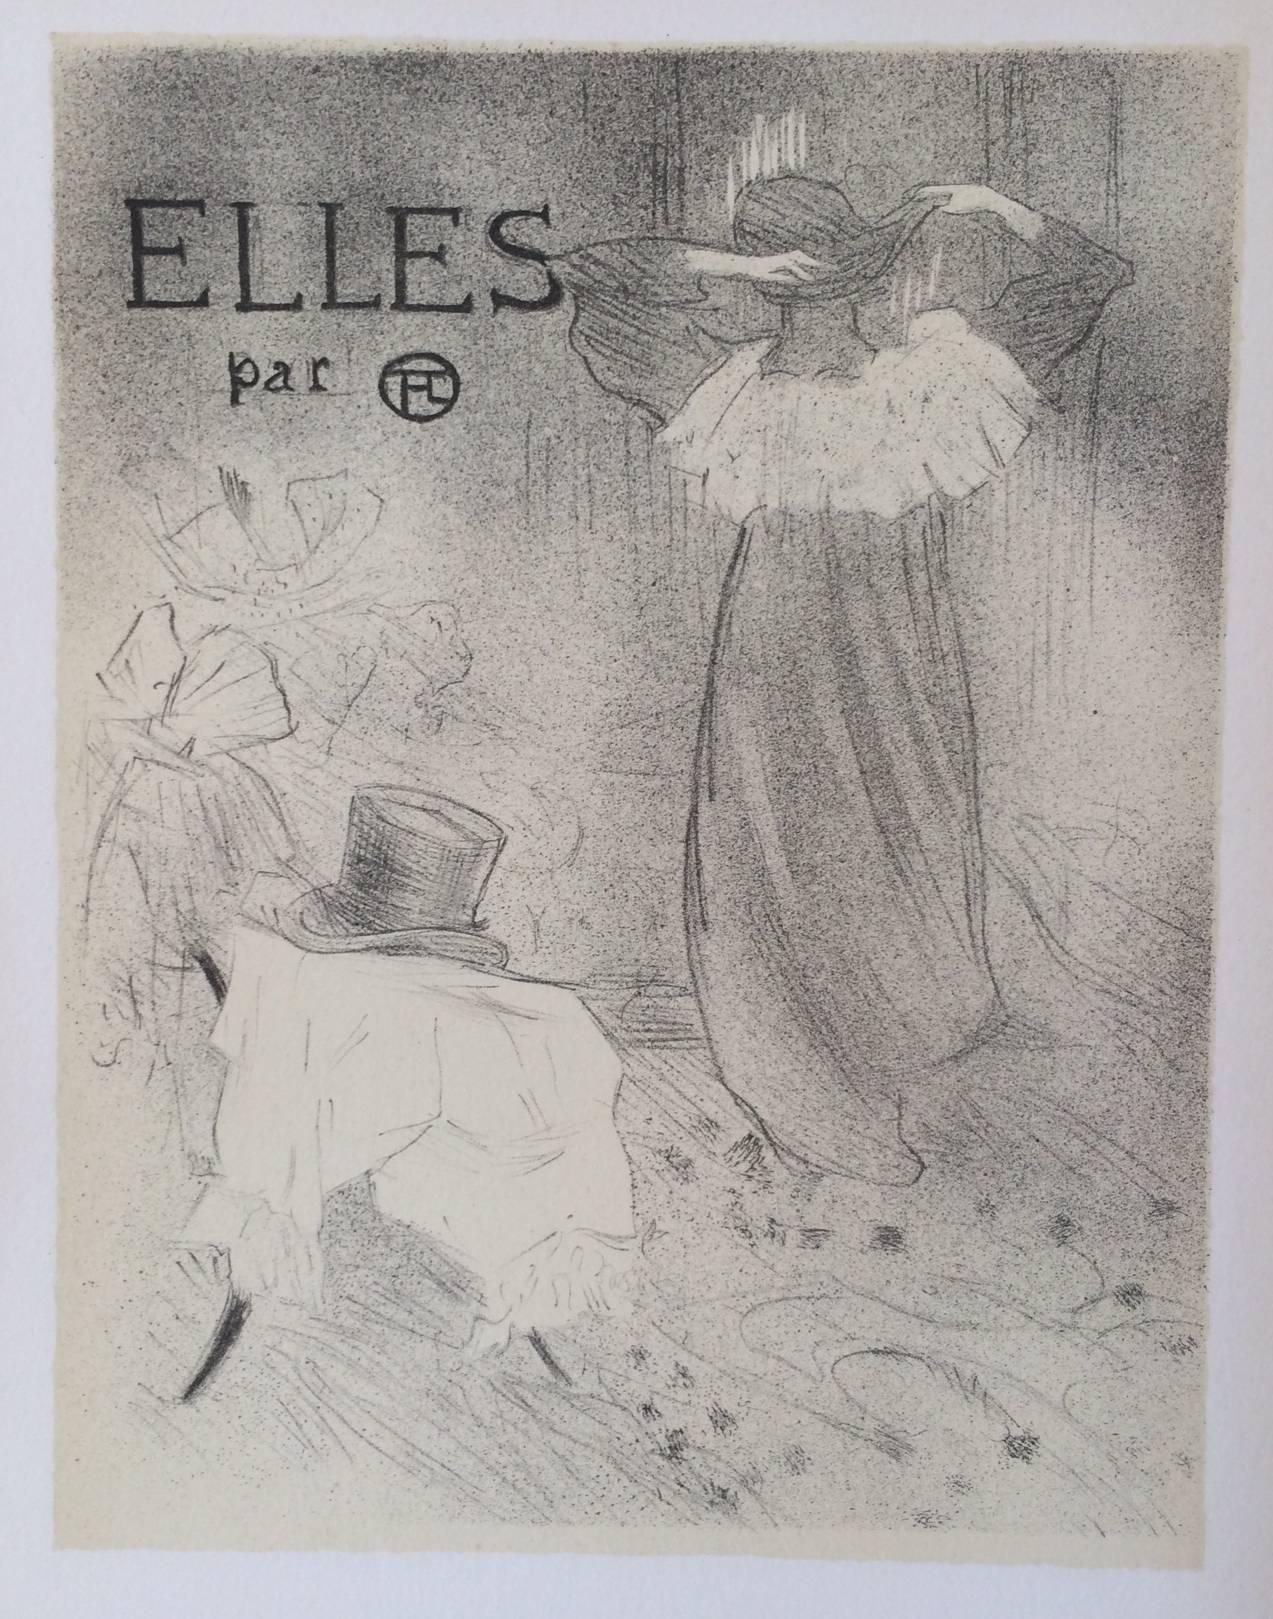 (After) Henri Toulouse Lautrec Figurative Print - "Couverture" ( Front Page ), from "Elles" Lithograph by Henri Toulouse Lautrec